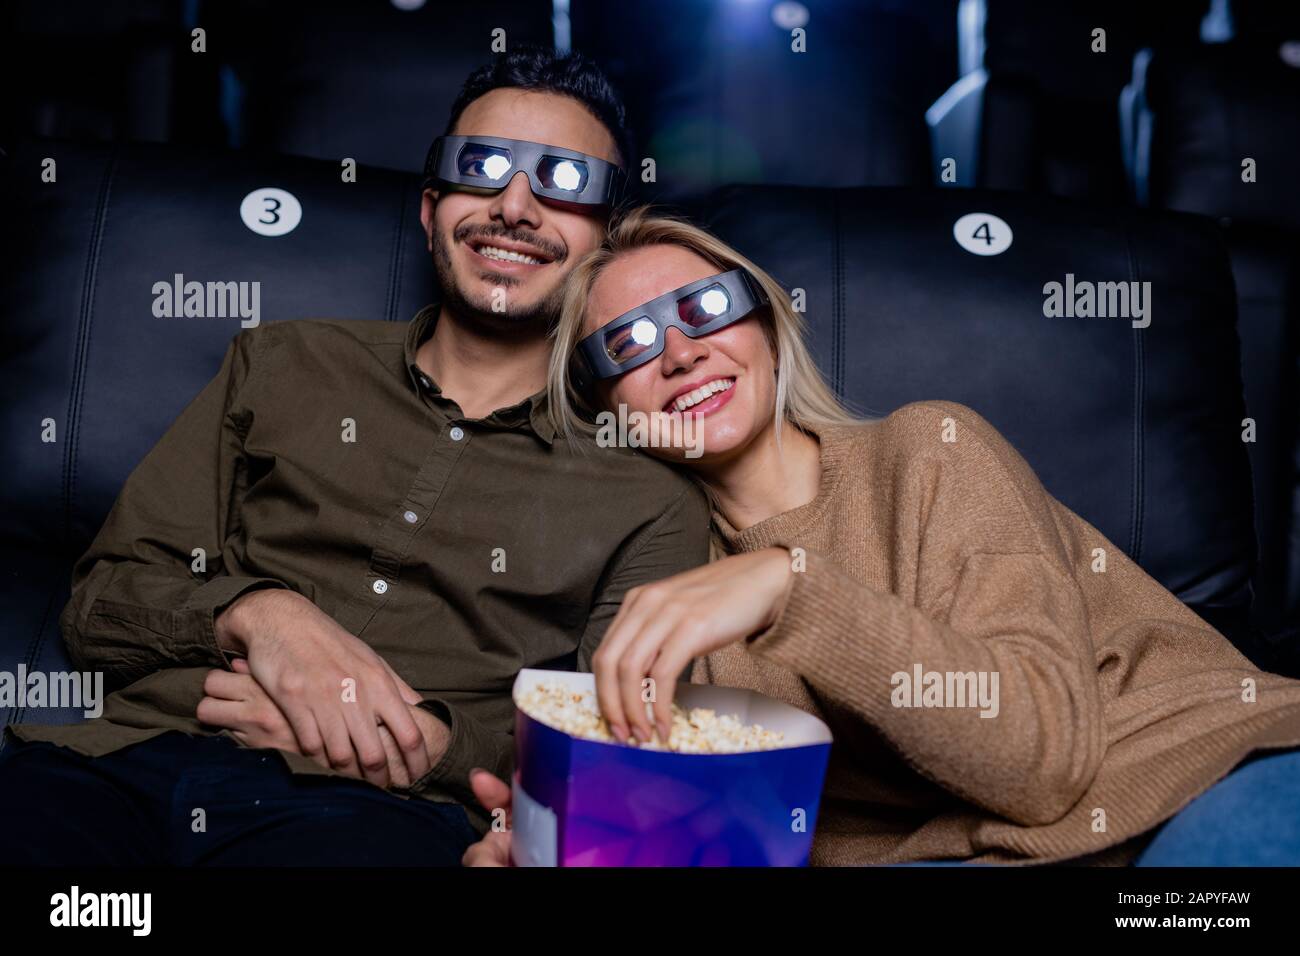 Happy young affectionate dates in 3d eyeglasses enjoying movie on large screen Stock Photo